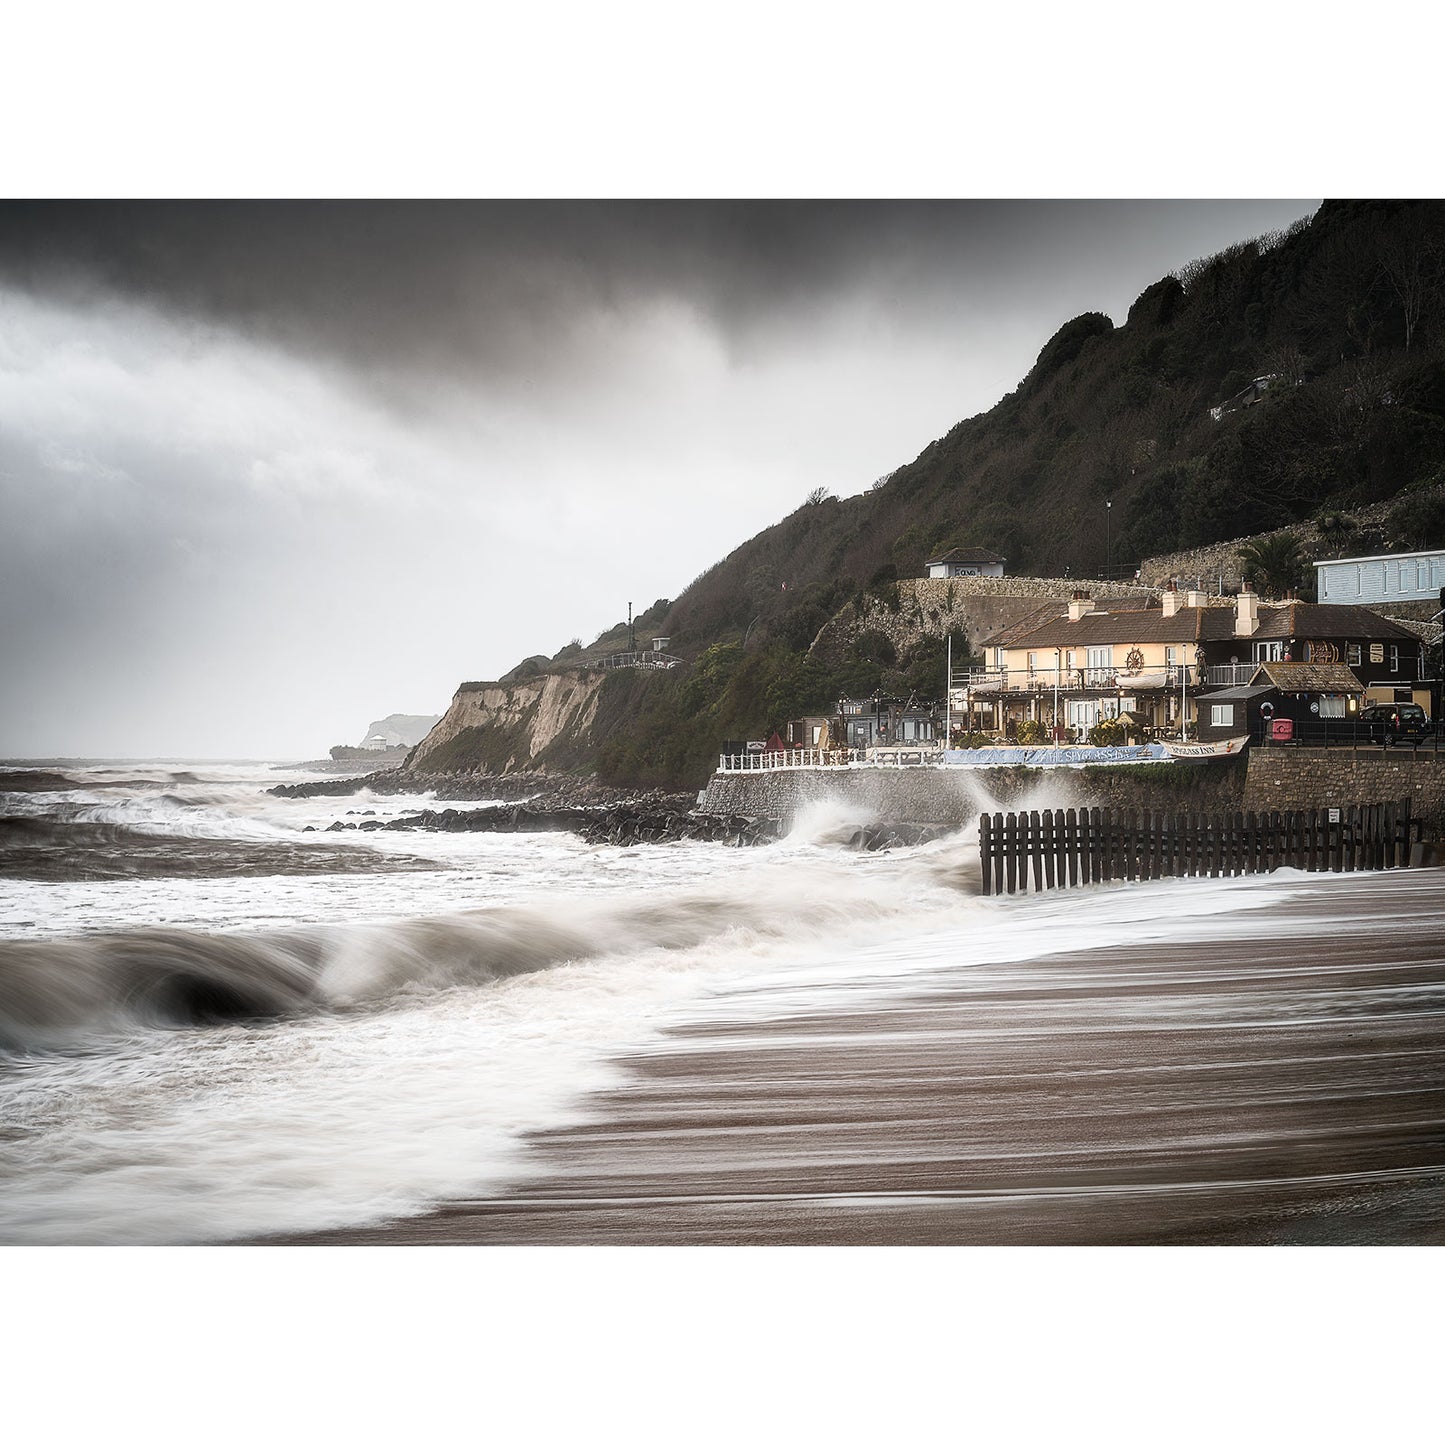 Overcast skies loom over a rough sea with waves breaking on a sandy beach, as buildings nestle along the rugged coastline of Ventnor by Available Light Photography.